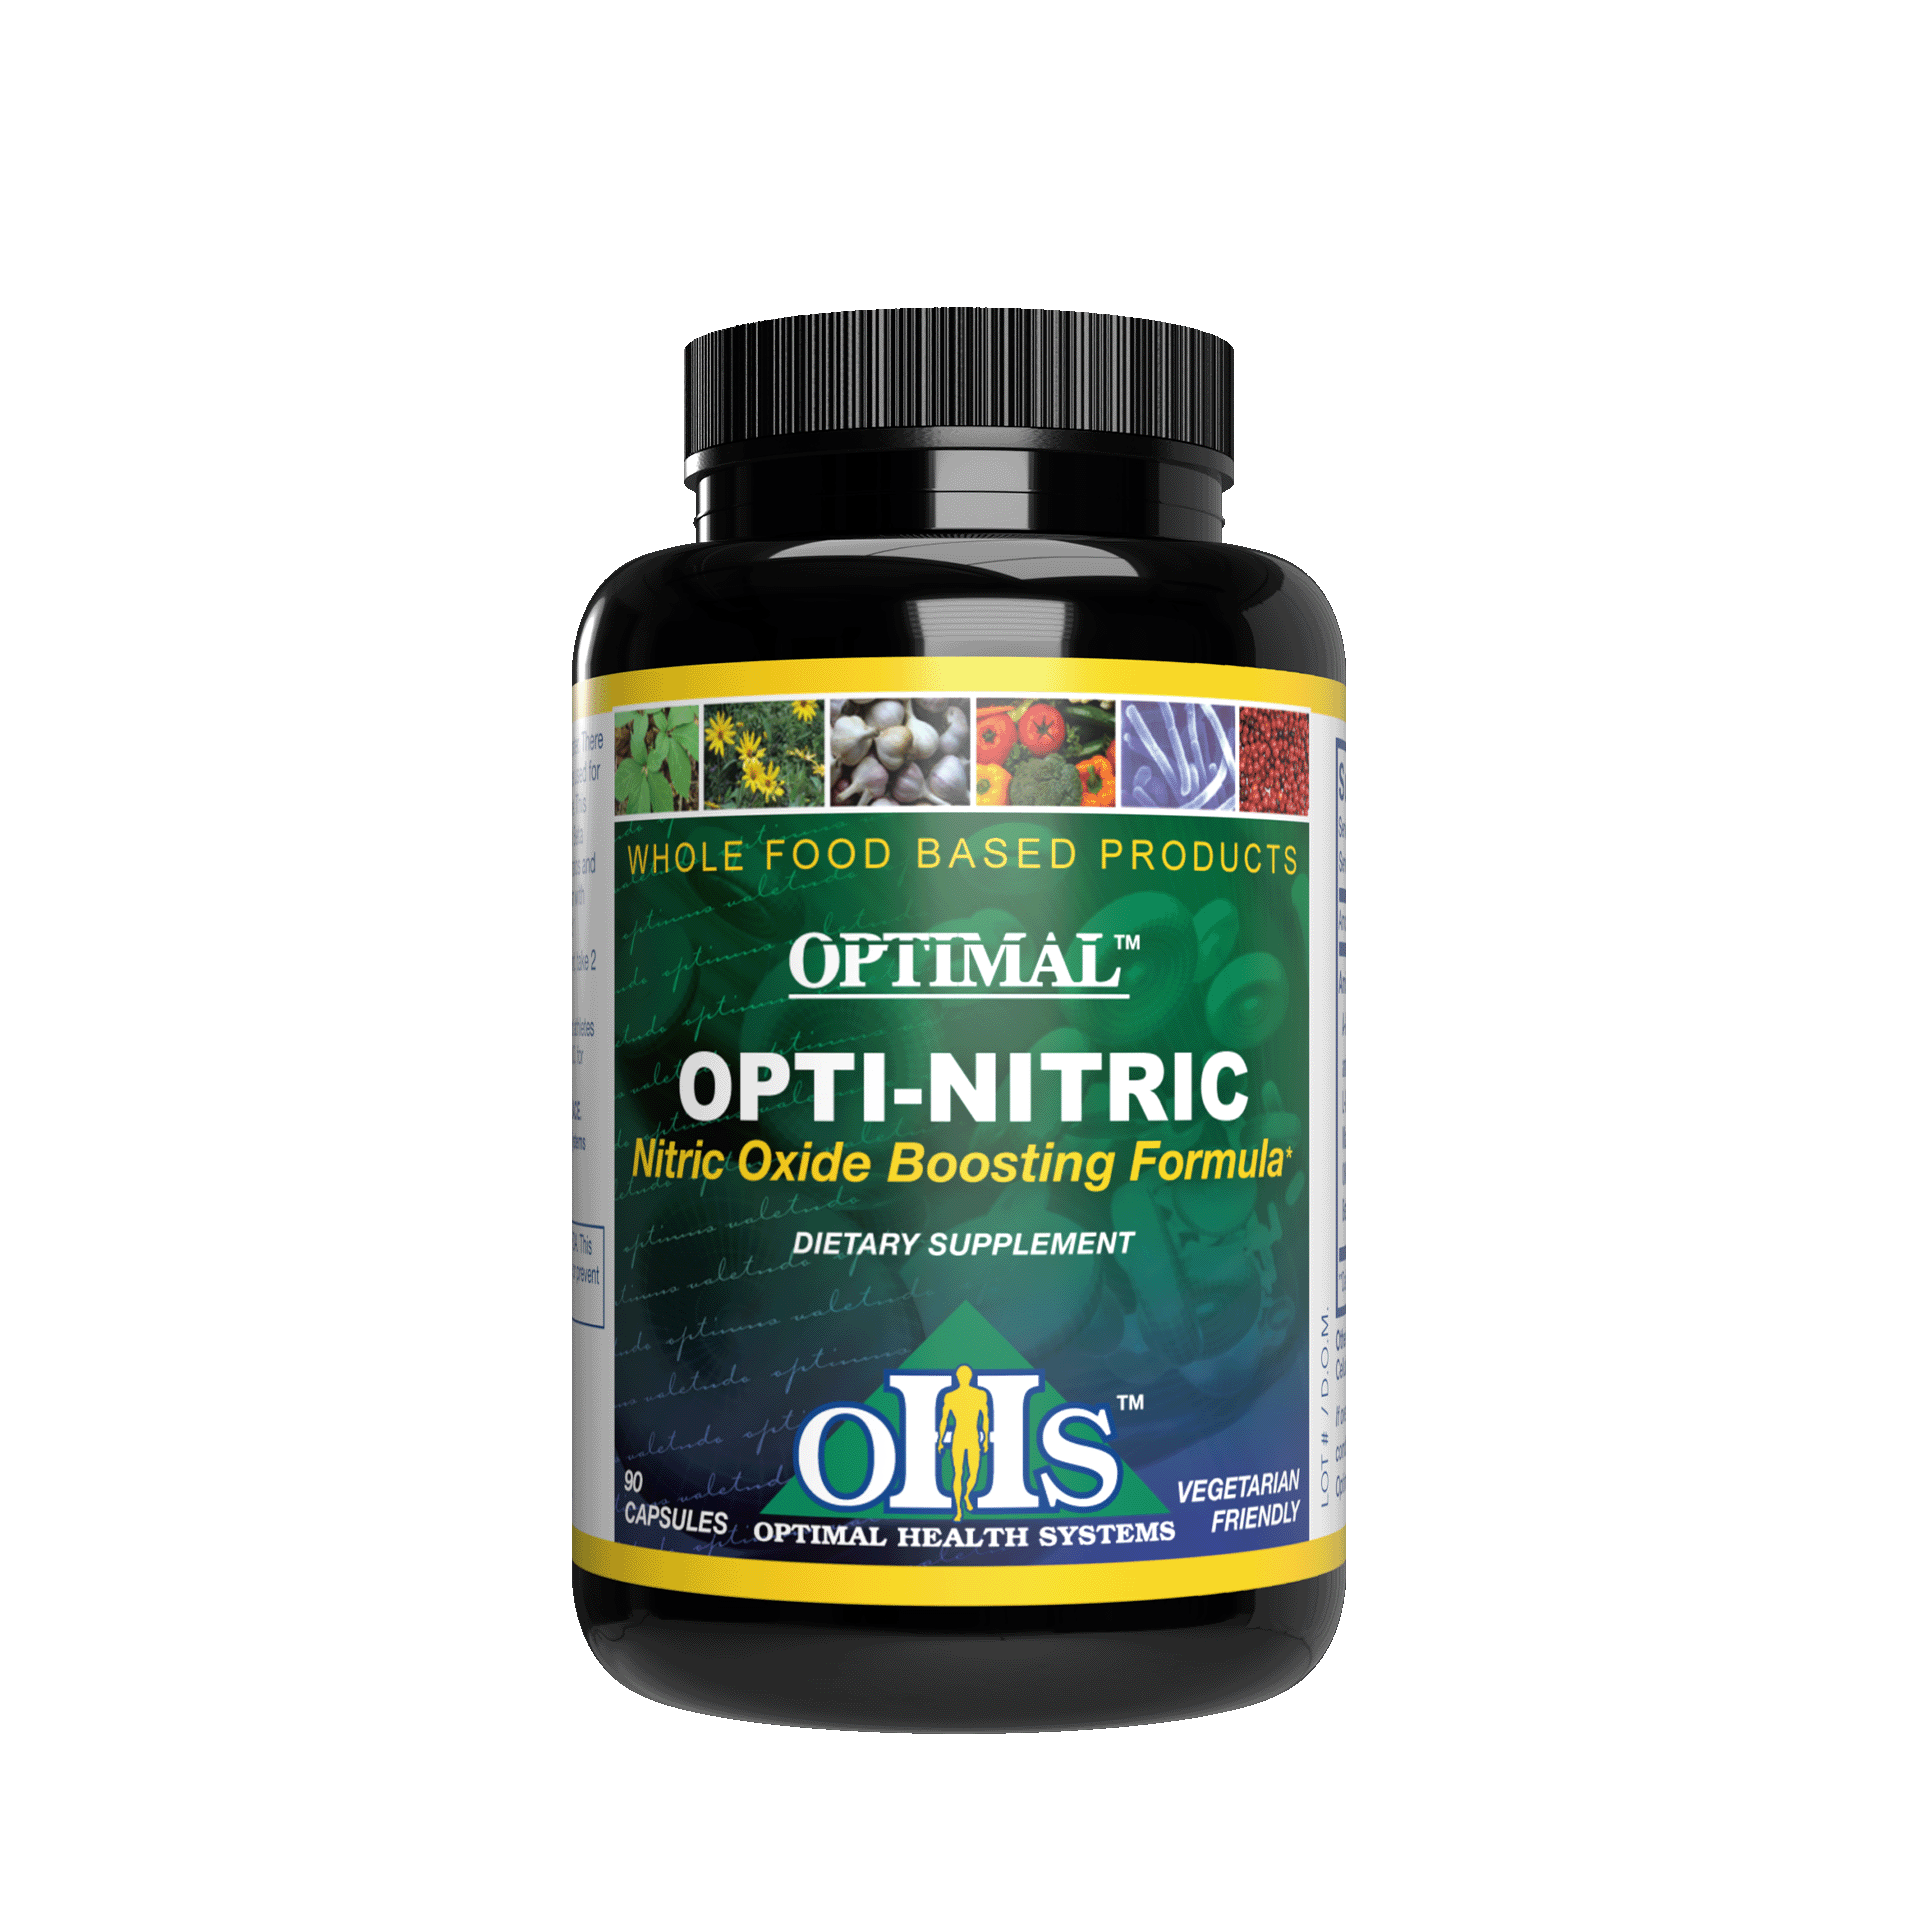 Image of a bottle of Optimal Opti-Nitric.